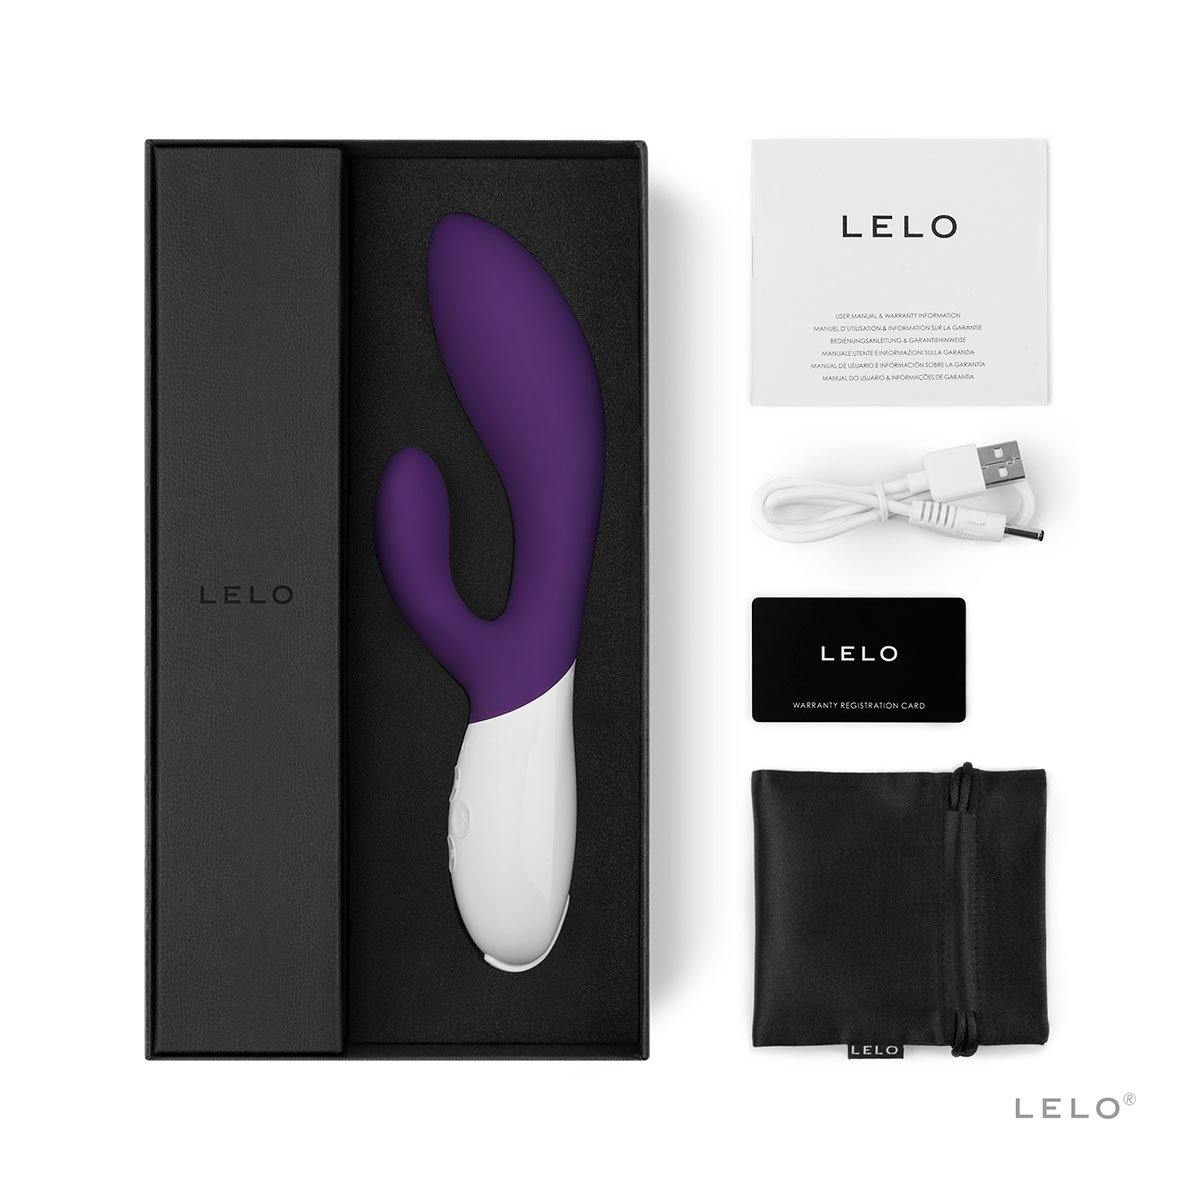 Lelo Ina 2 - Buy At Luxury Toy X - Free 3-Day Shipping